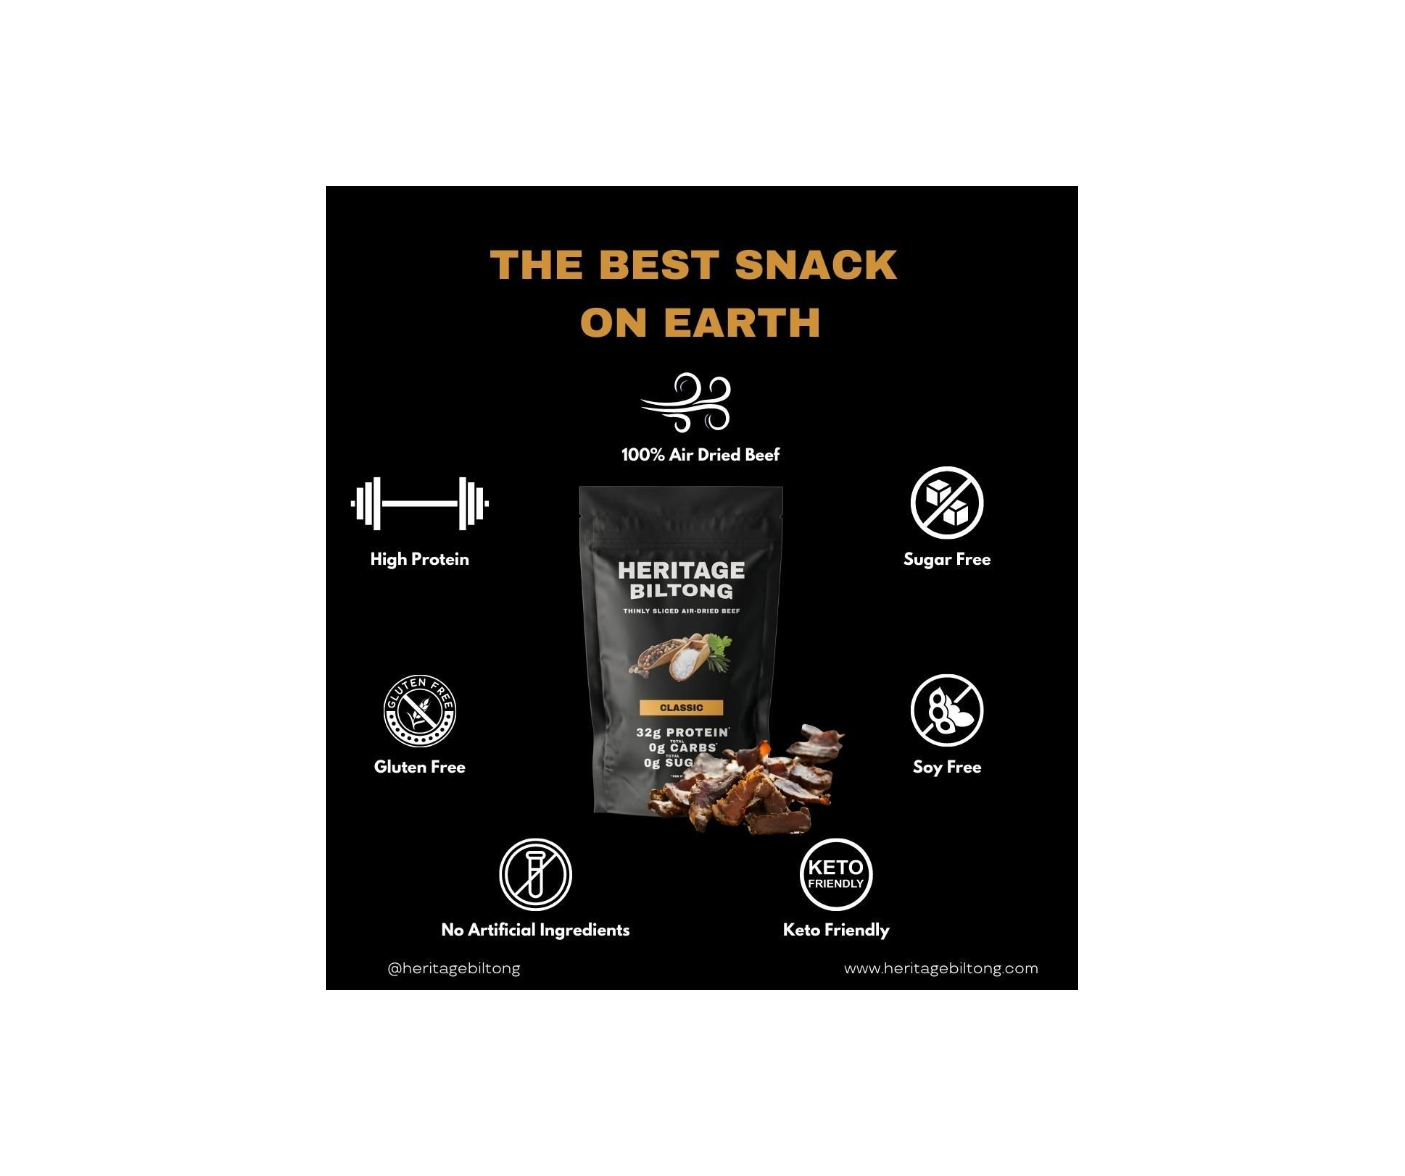 The Best Snack on Earth - Heritage Biltong